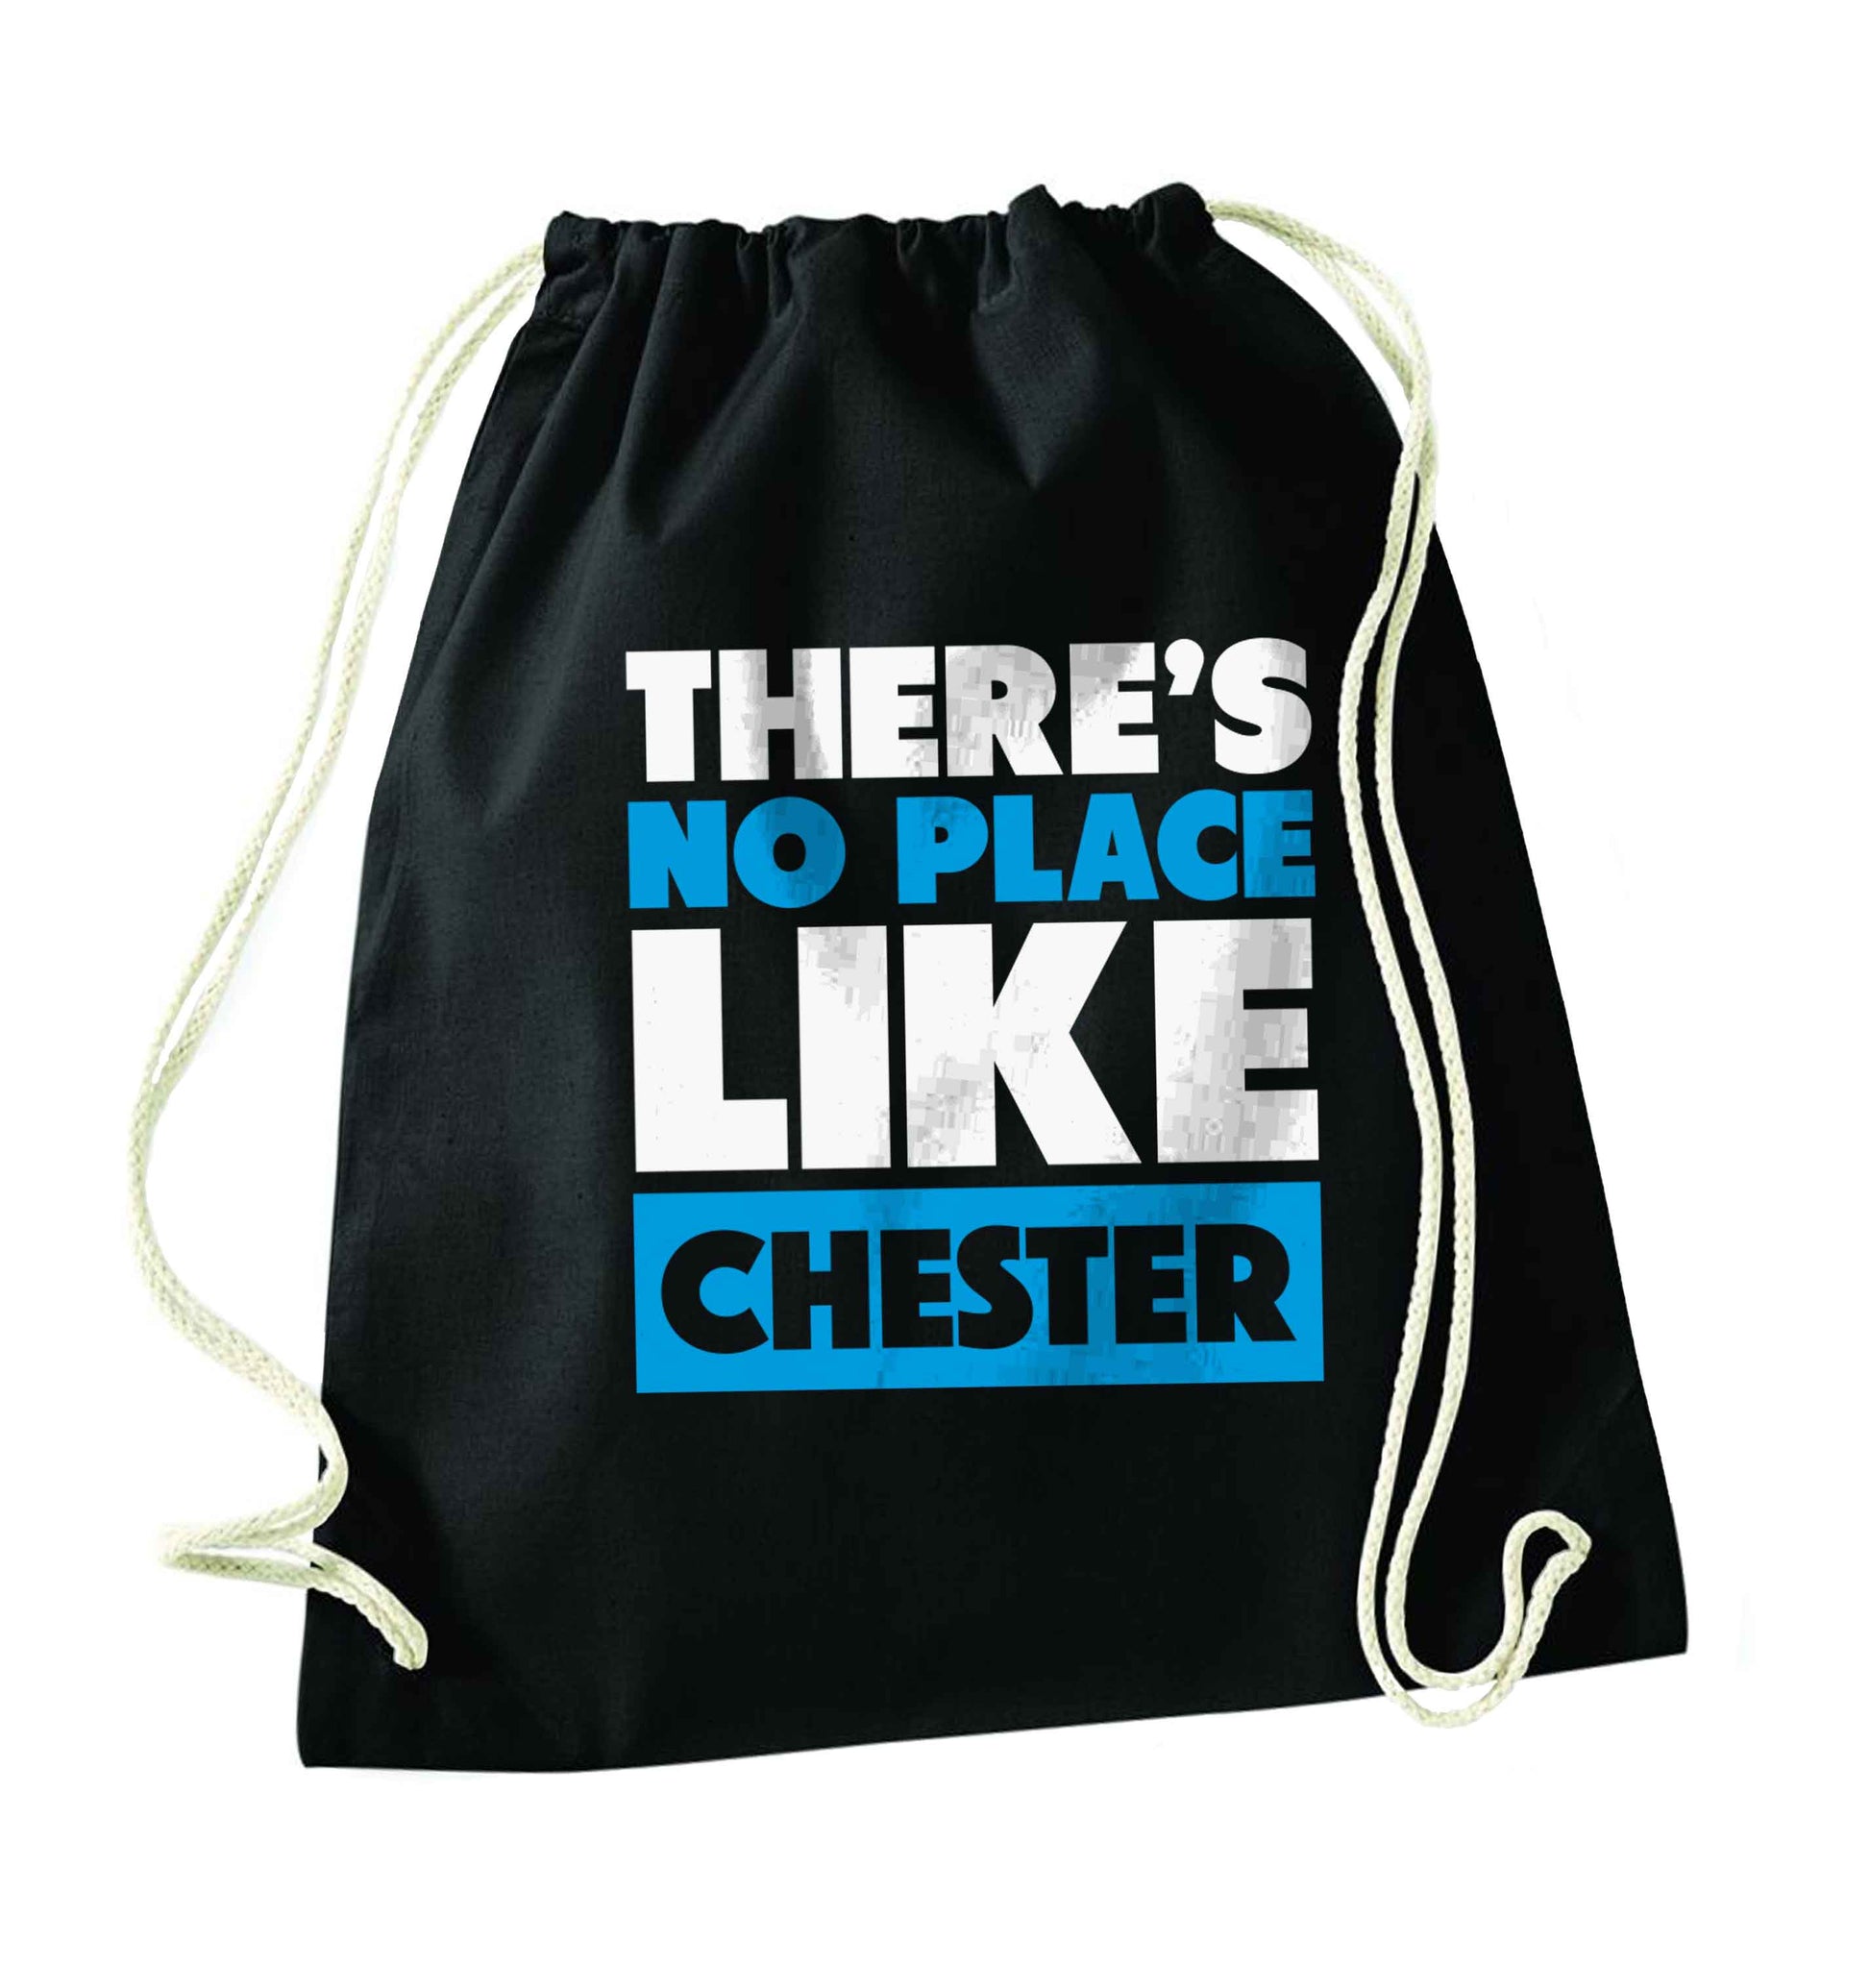 There's no place like Chester black drawstring bag